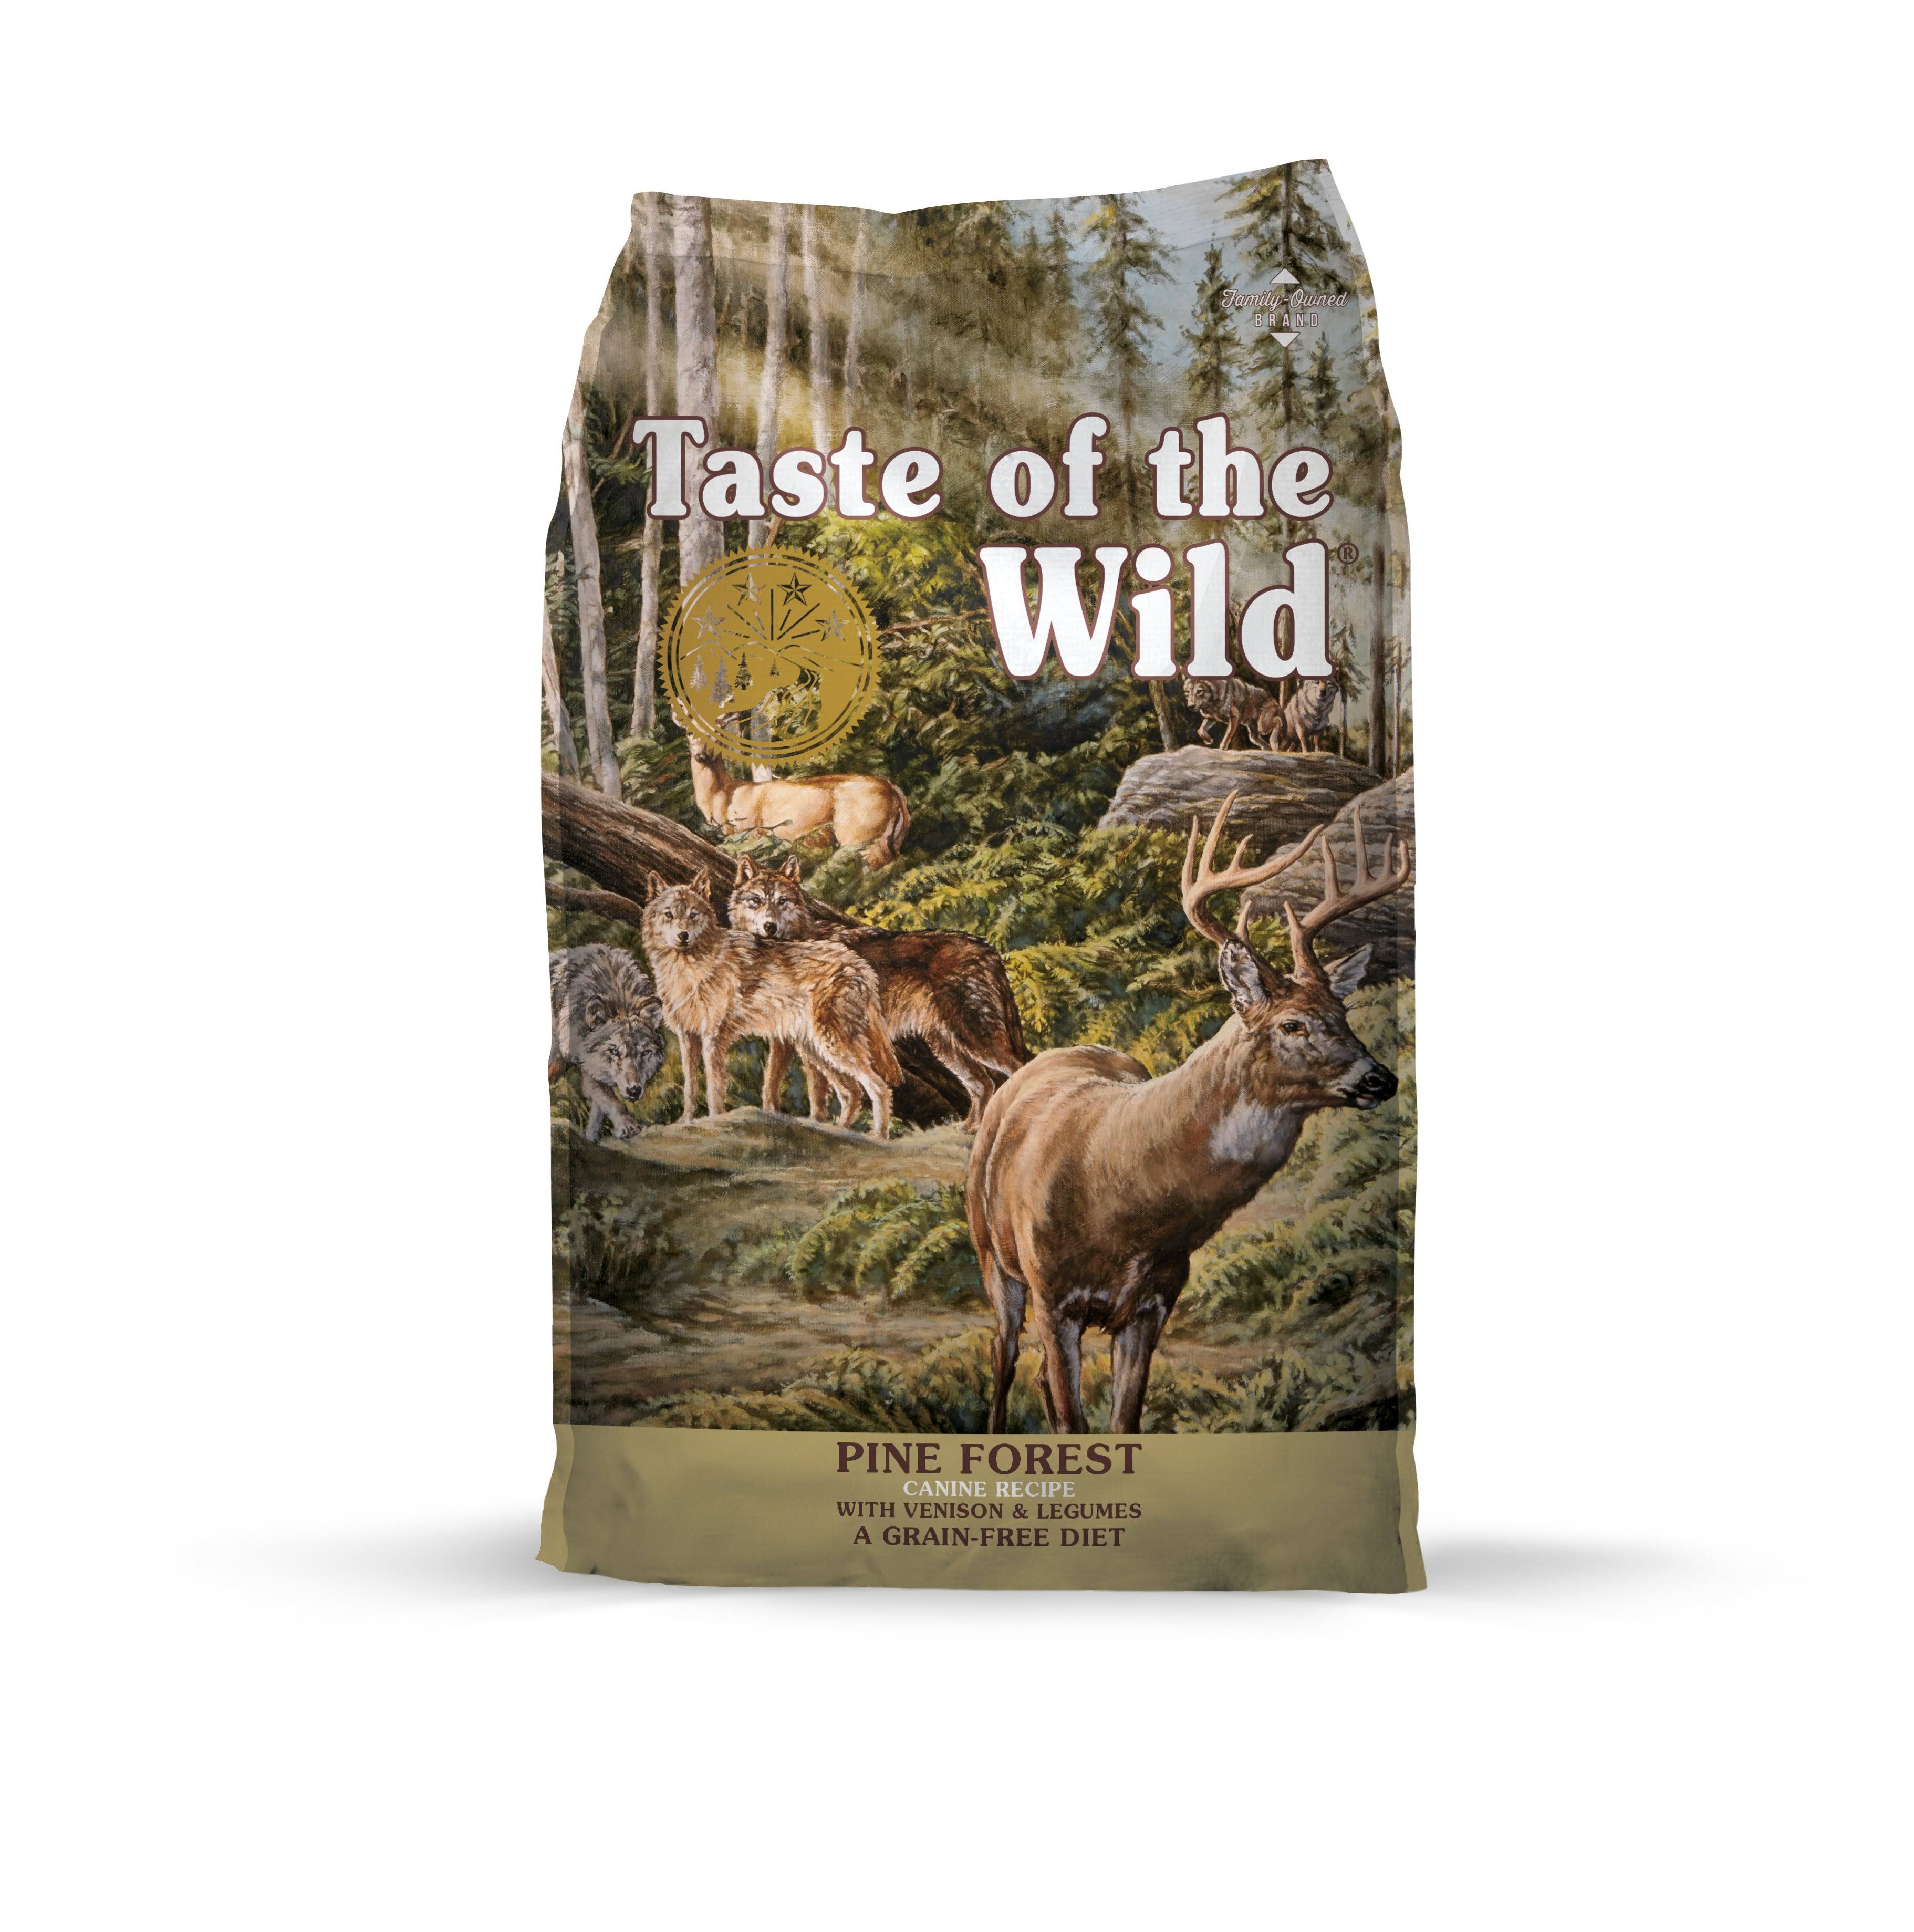 Taste of the Wild Dog Food - Pine Forest Canine Formula with Venison and Legunies